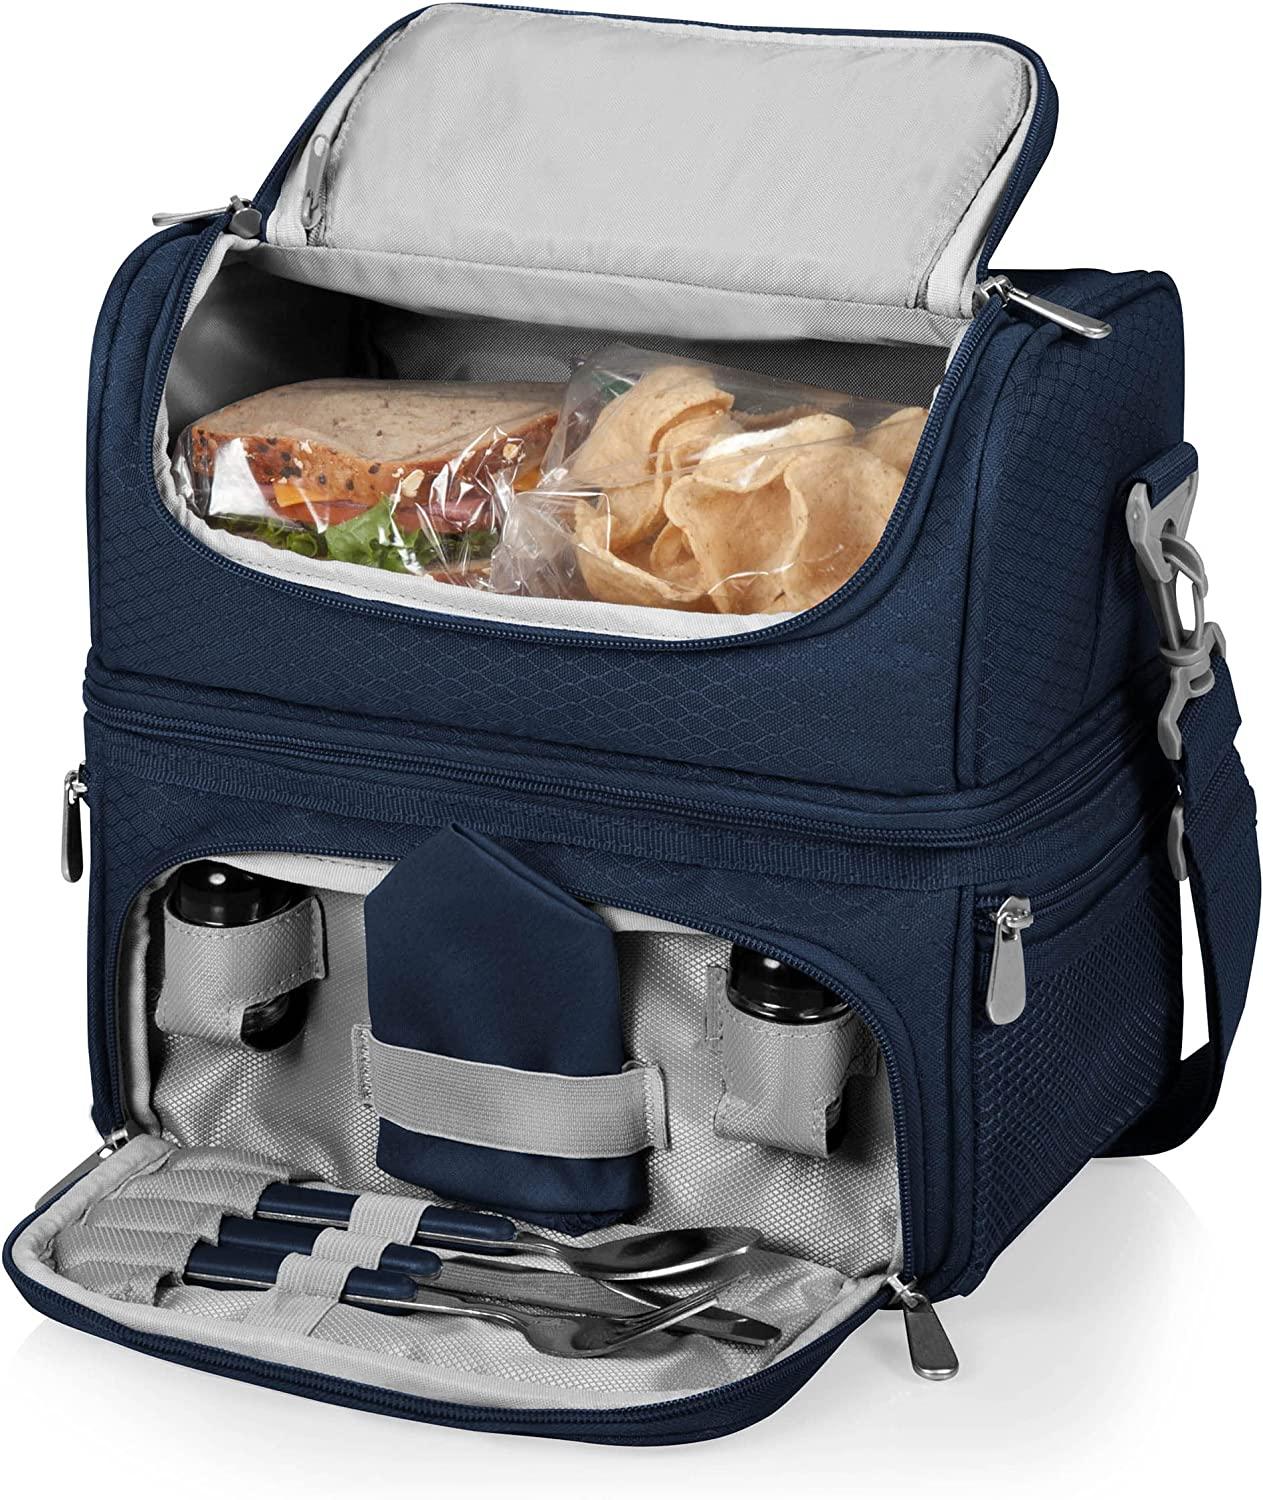  PICNIC TIME - On The Go Lunch Bag - Soft Cooler Lunch Box -  Insulated Lunch Bag, (Navy Blue) : Sports & Outdoors